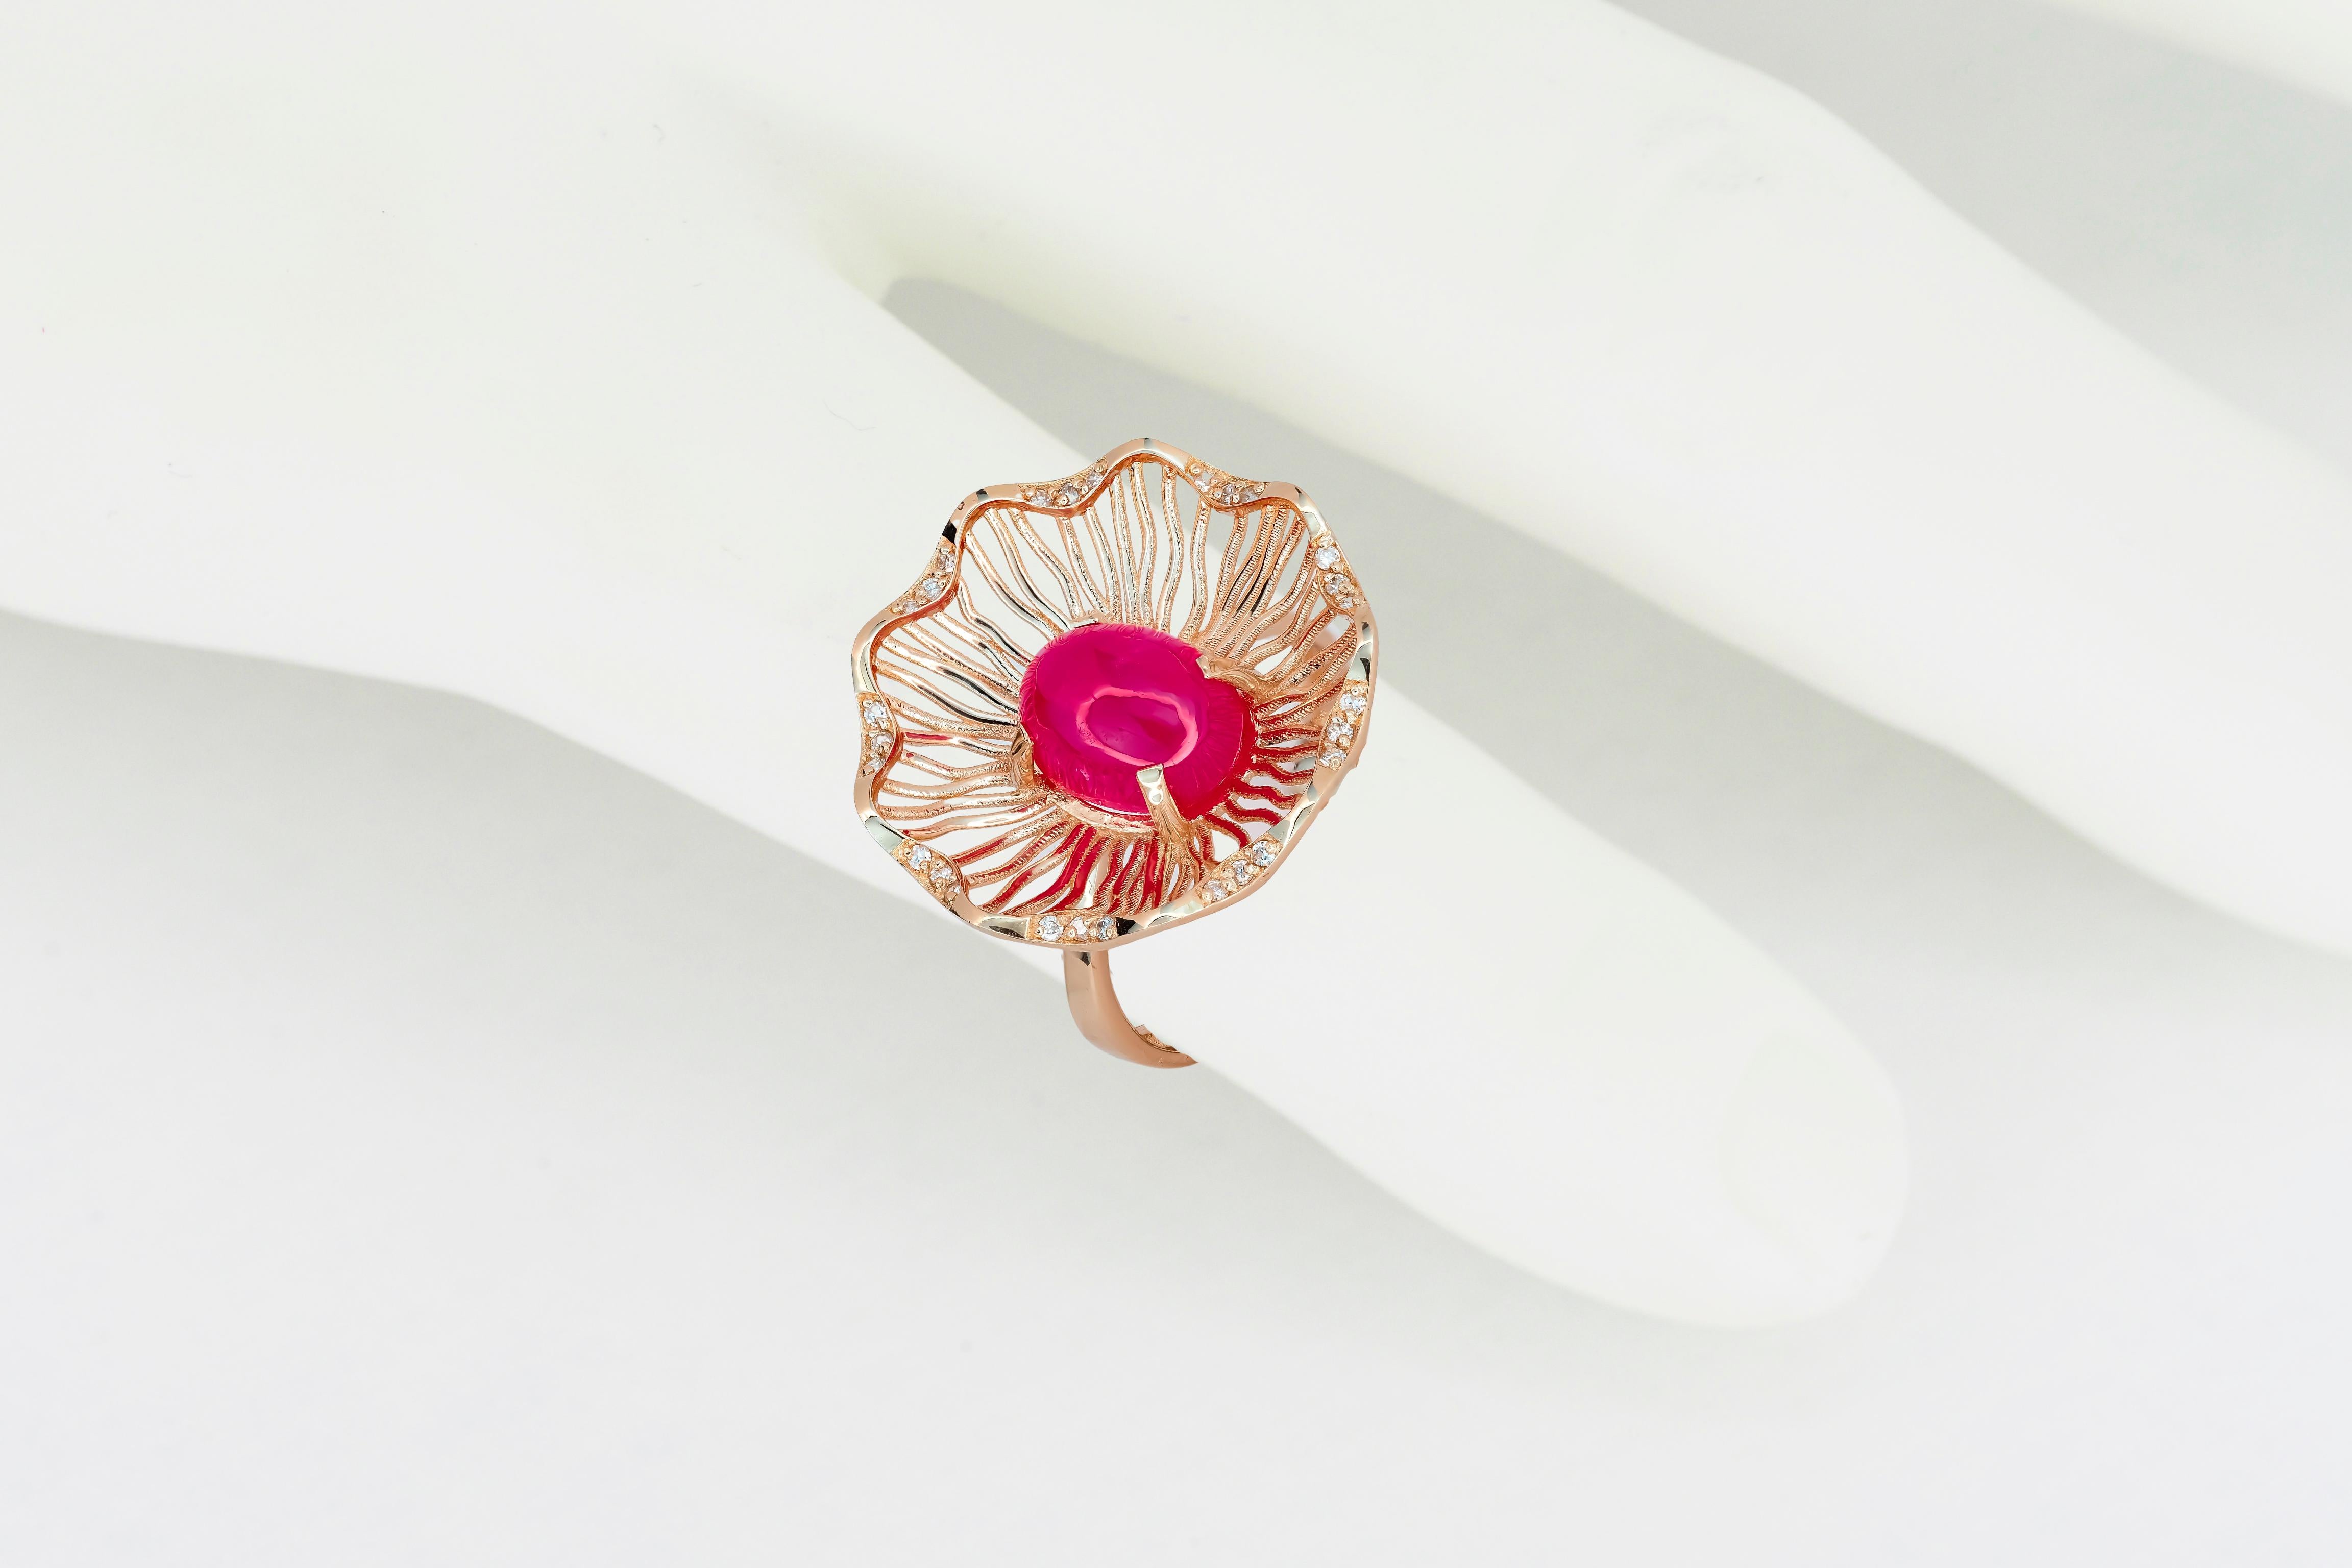 Pink Gold Ring with Ruby and Diamonds, Vintage Style Ring with Ruby Cabochon 5